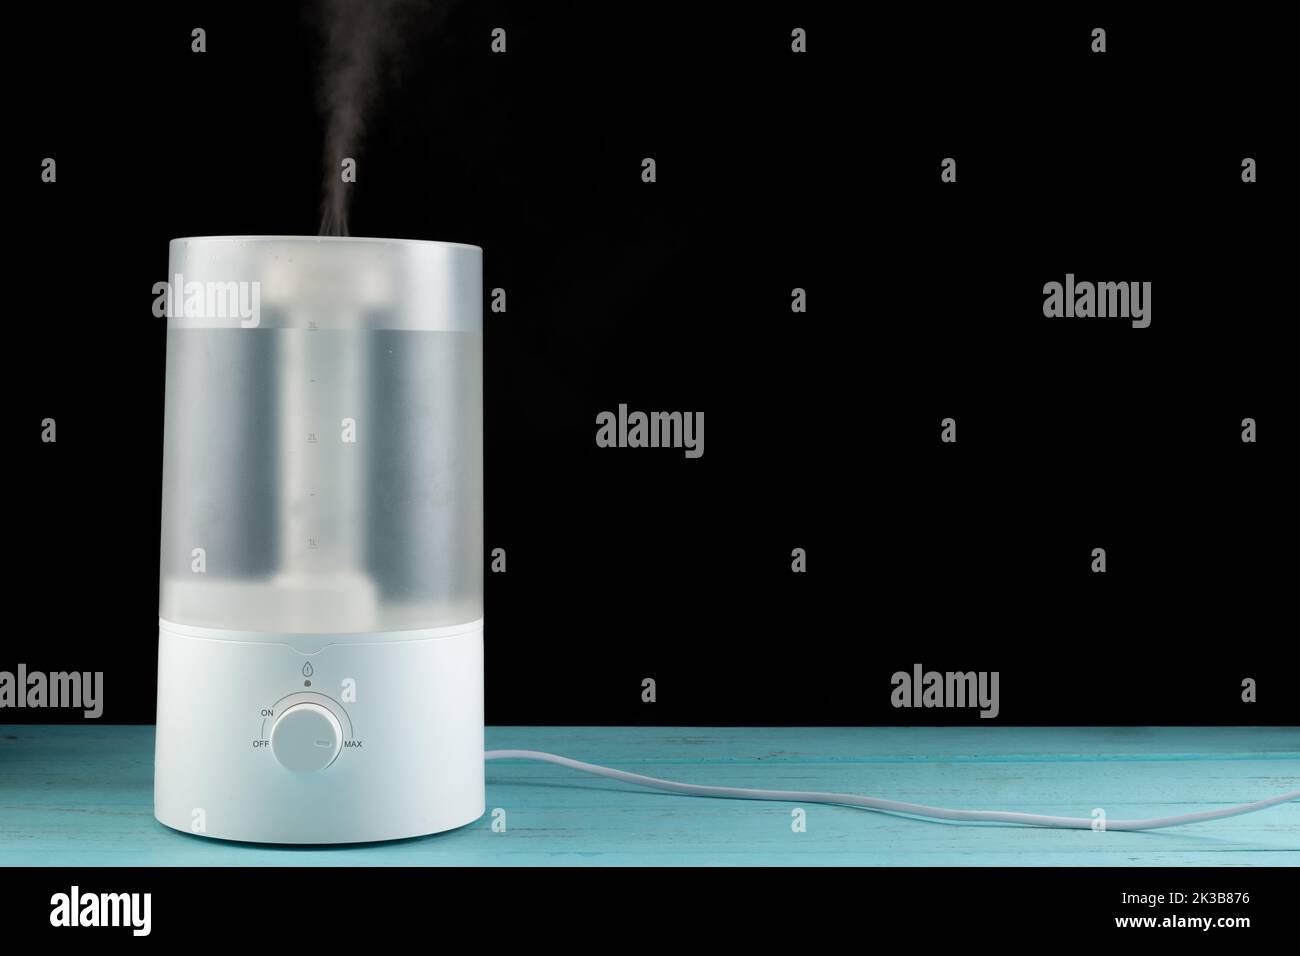 electric humidifier on a table horizontal composition Stock Photo